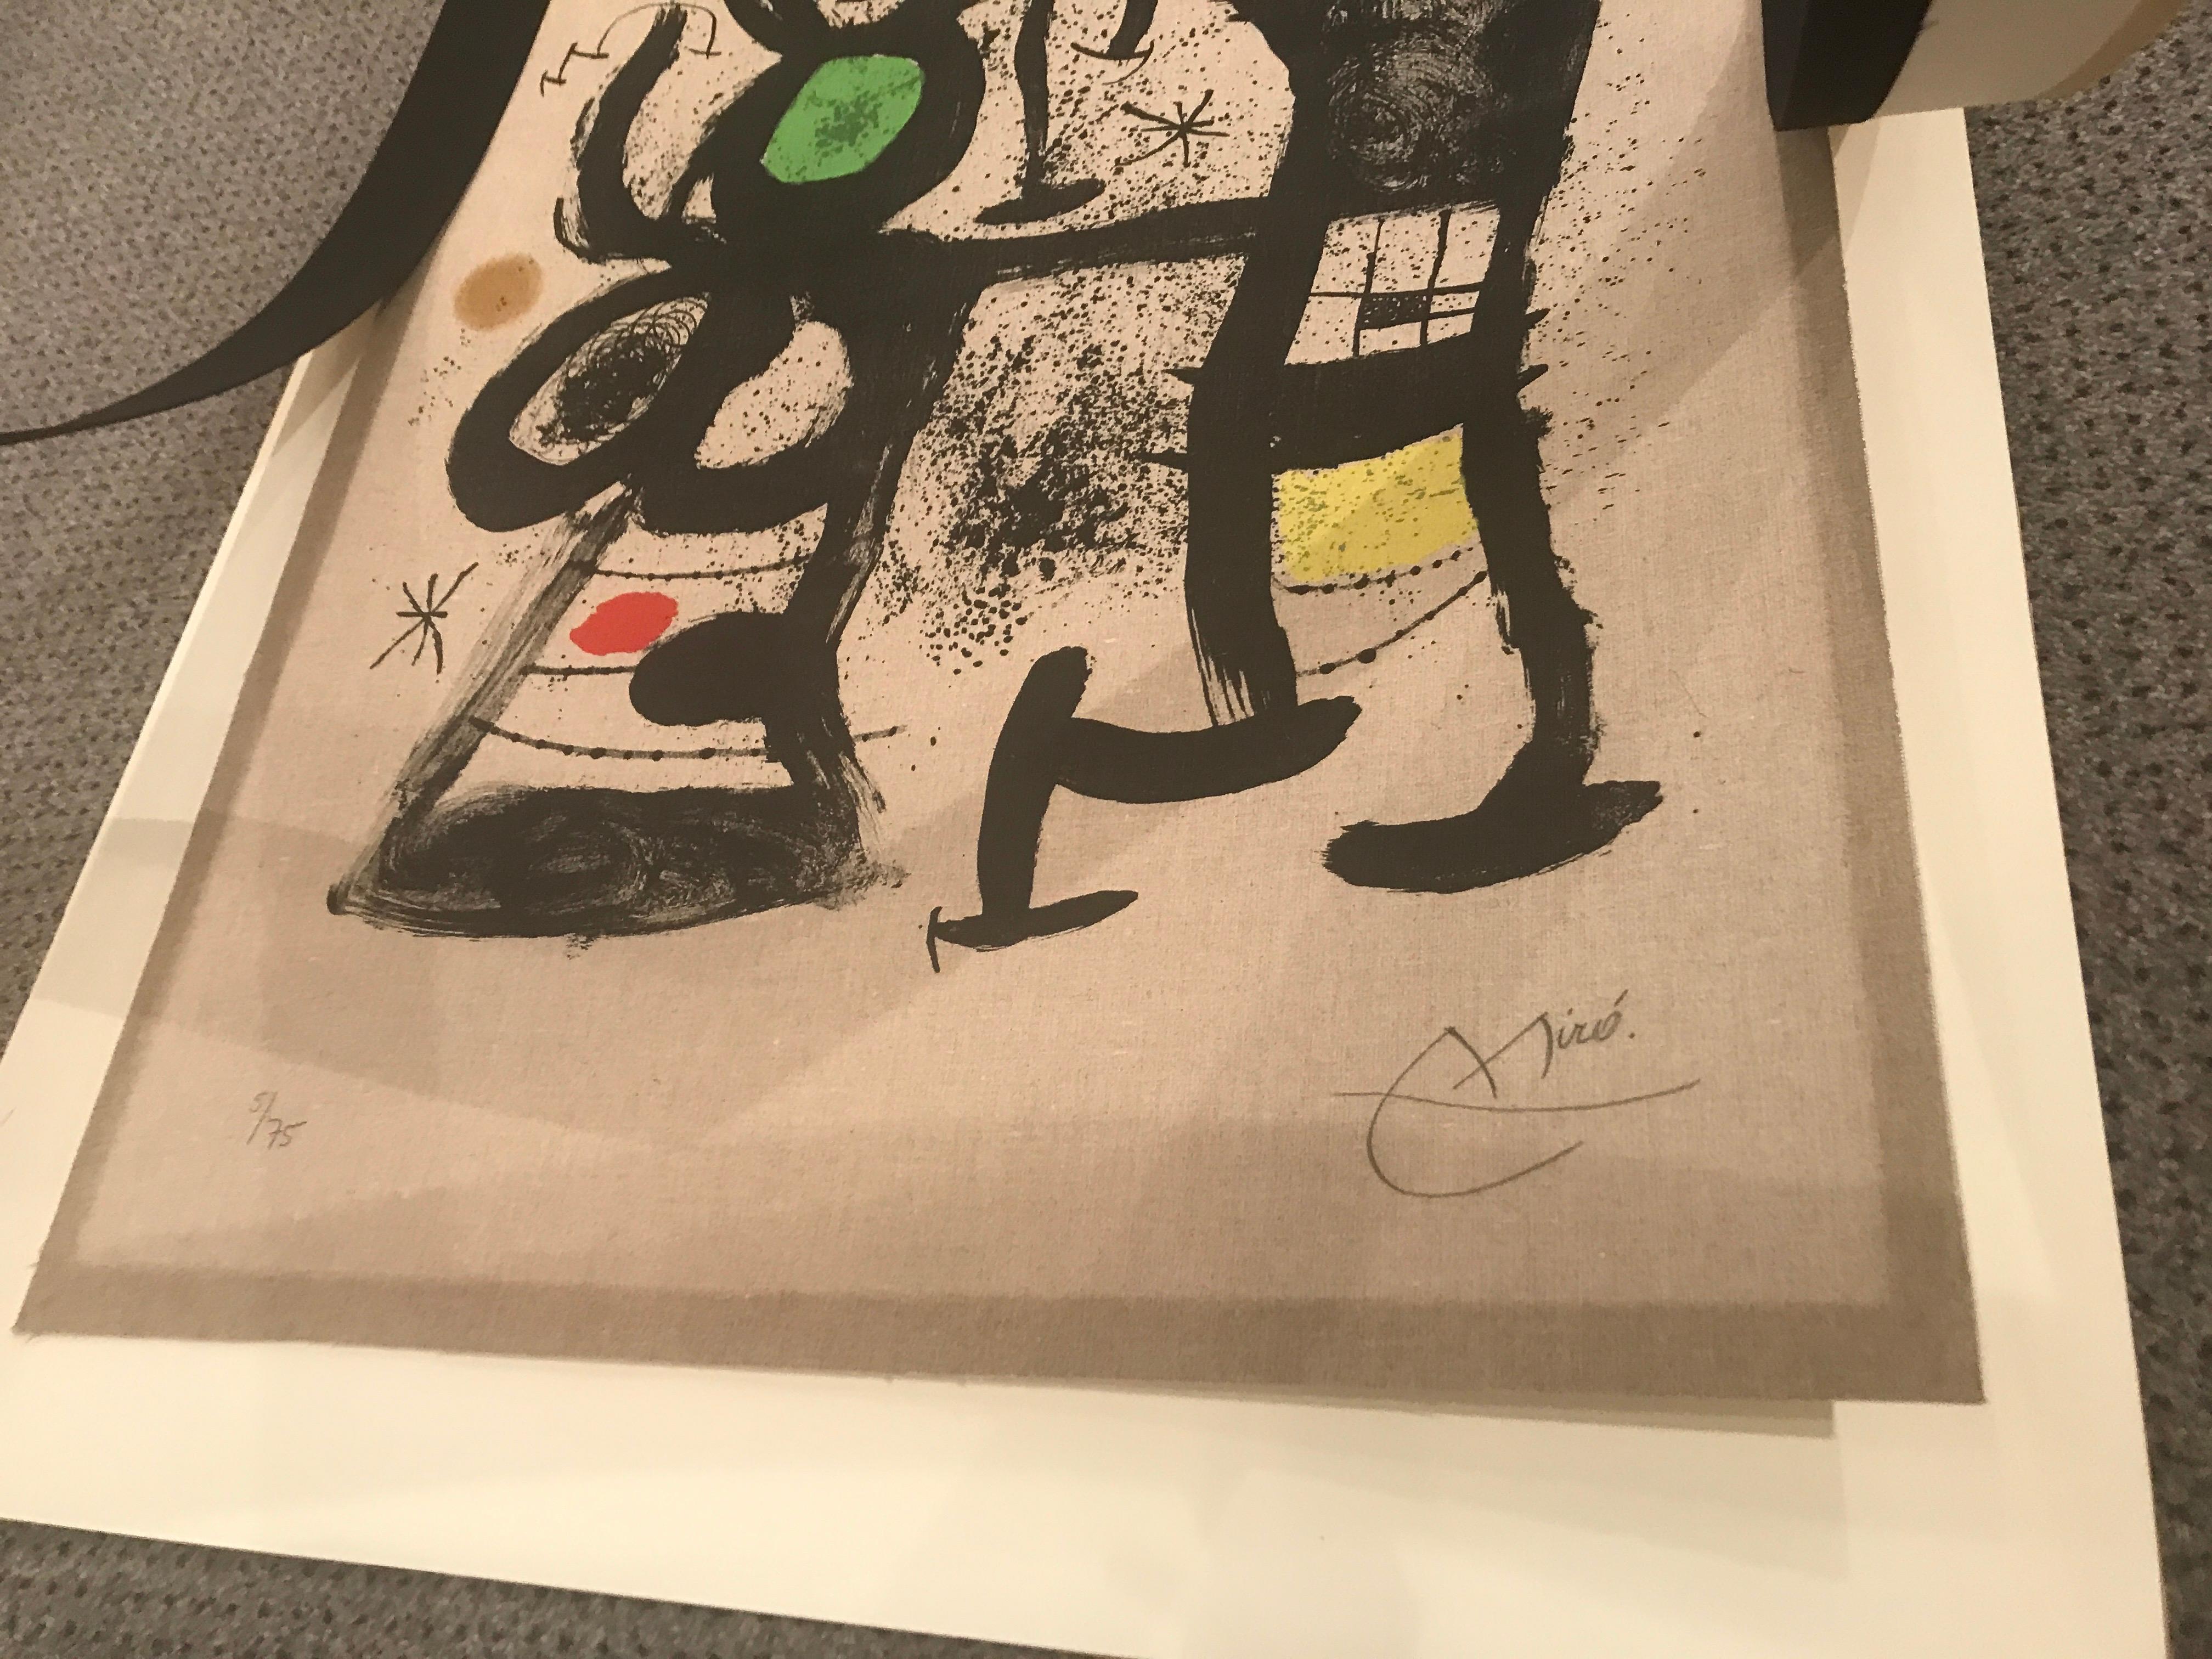 A very good impression of this color lithograph on Hessian cloth (burlap) adhered to Mandeure chiffon. Signed and numbered 5/75 in pencil by Miro. Printed and published by Maeght, Paris. 